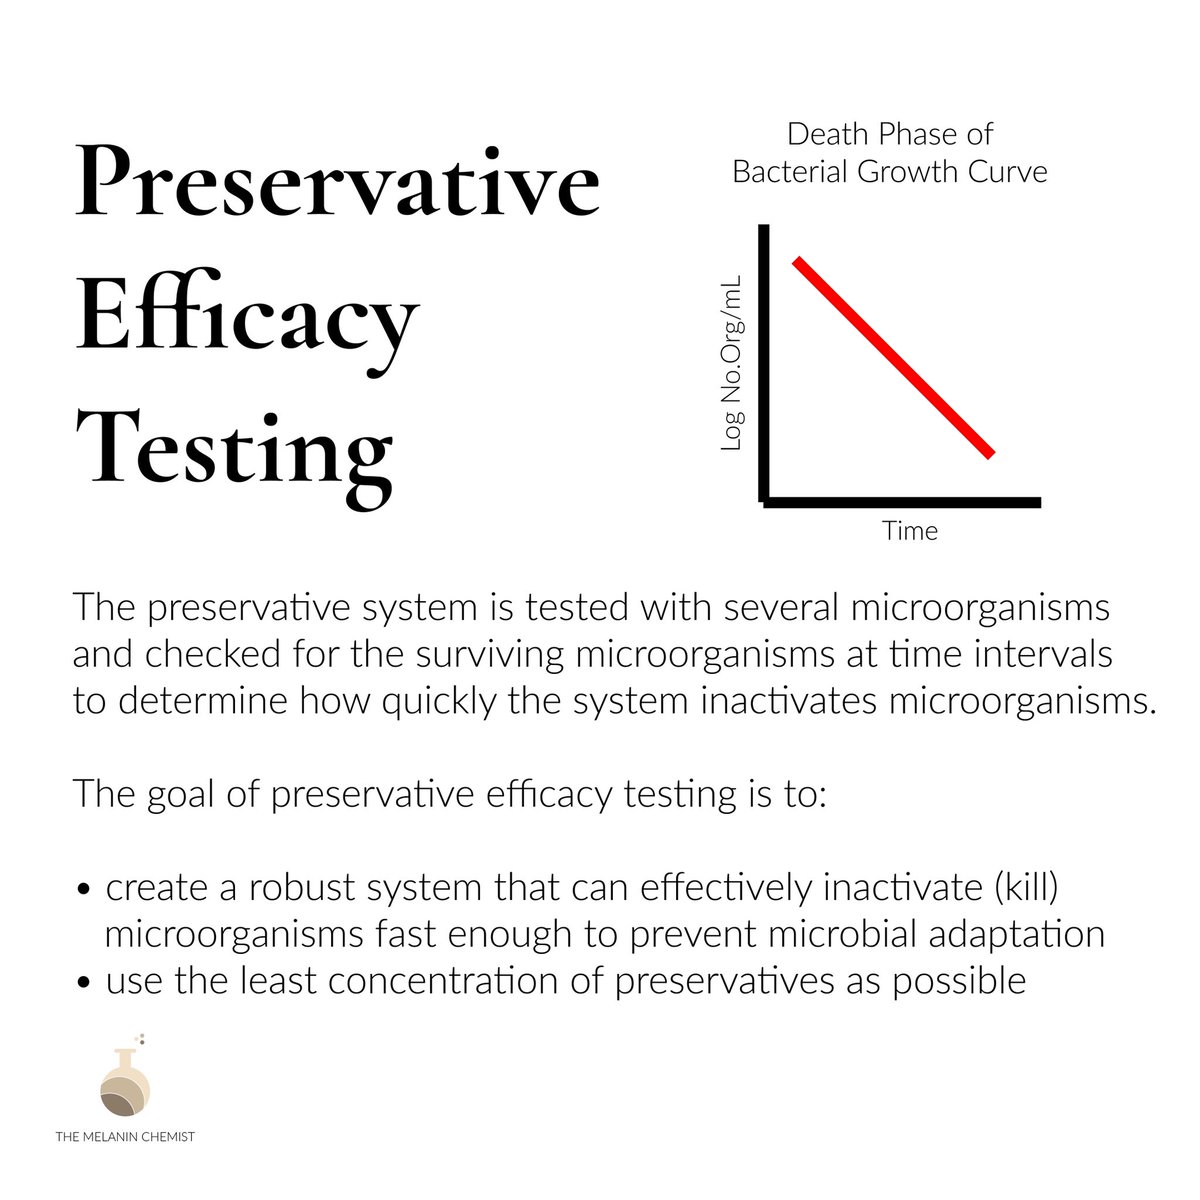 Overall, the goal of testing preservatives is to use the least amount of preservatives that will kill microorganisms in a certain amount of time. If it does not kill them off within this time, the system is not good and needs to be fixed